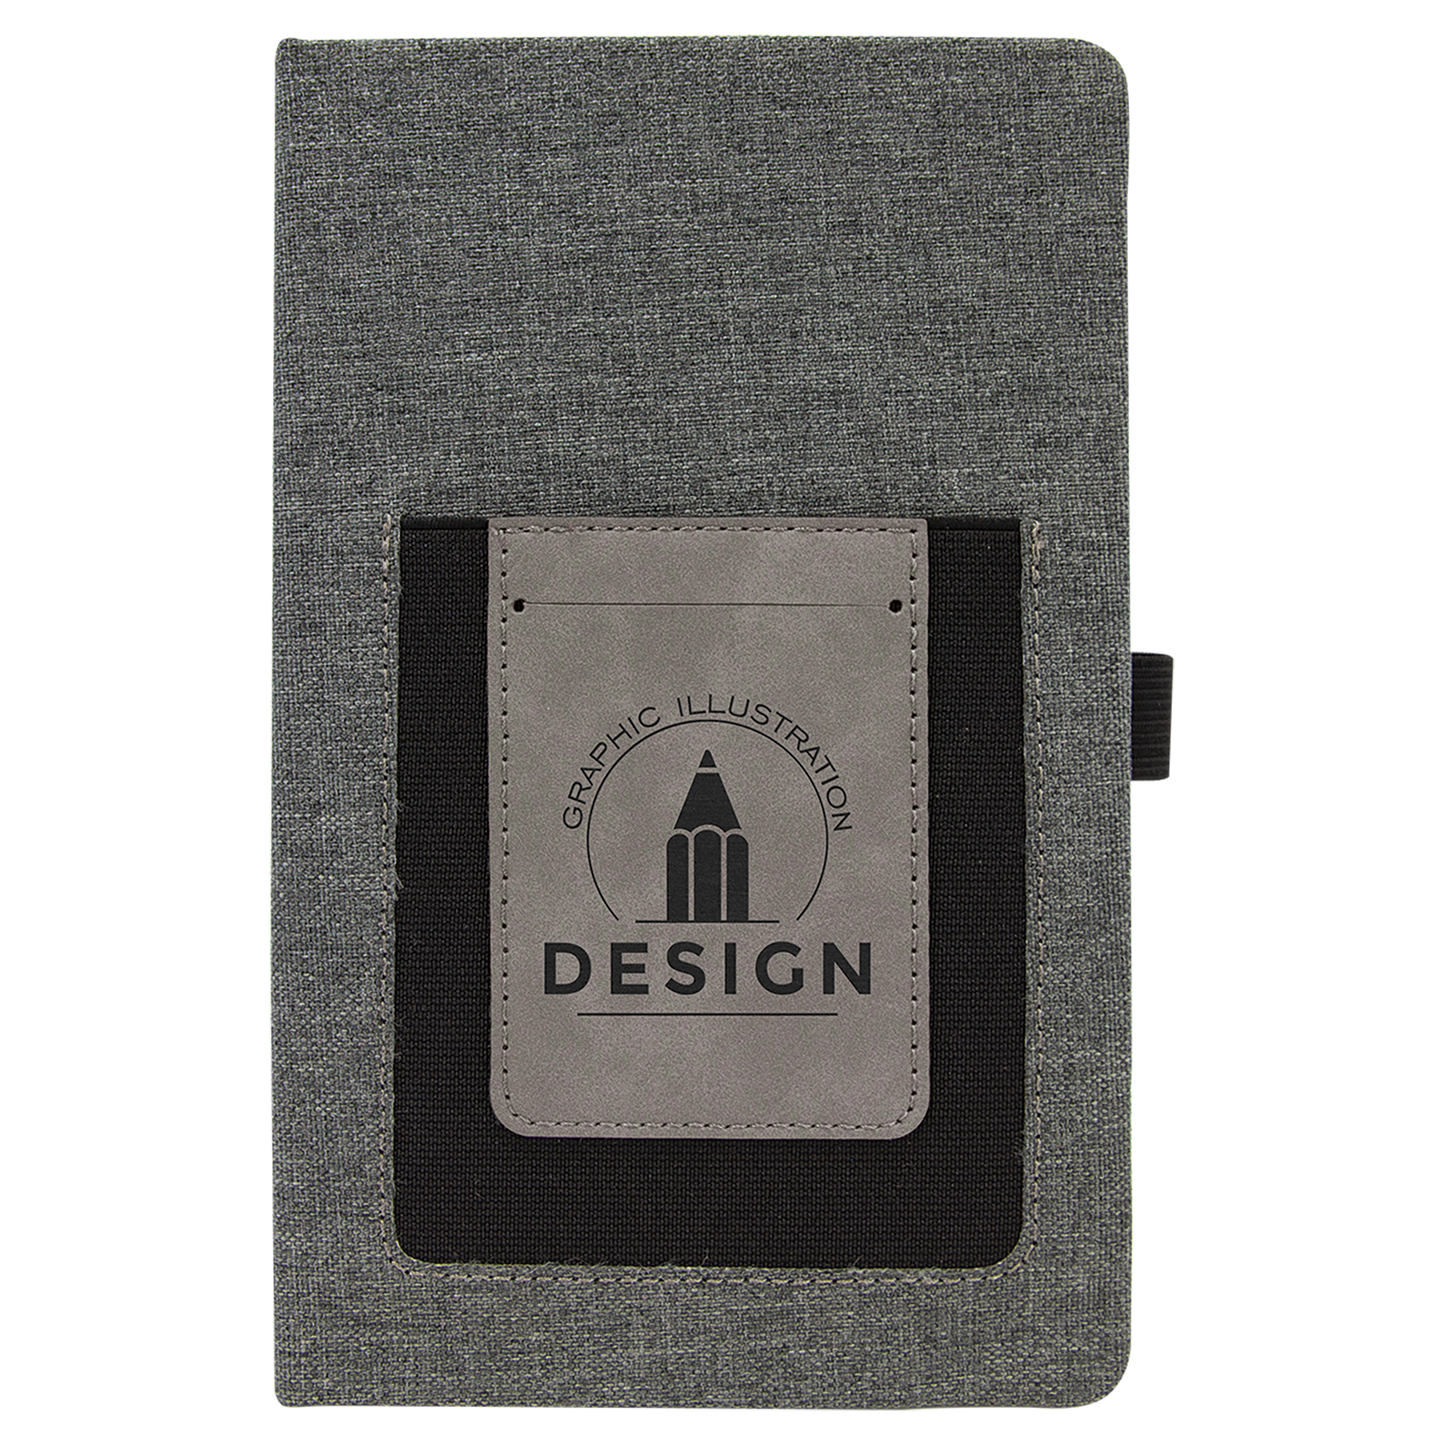 Gray Canvas Journal with Gray Leatherette Cell Phone Pocket & Card Holder